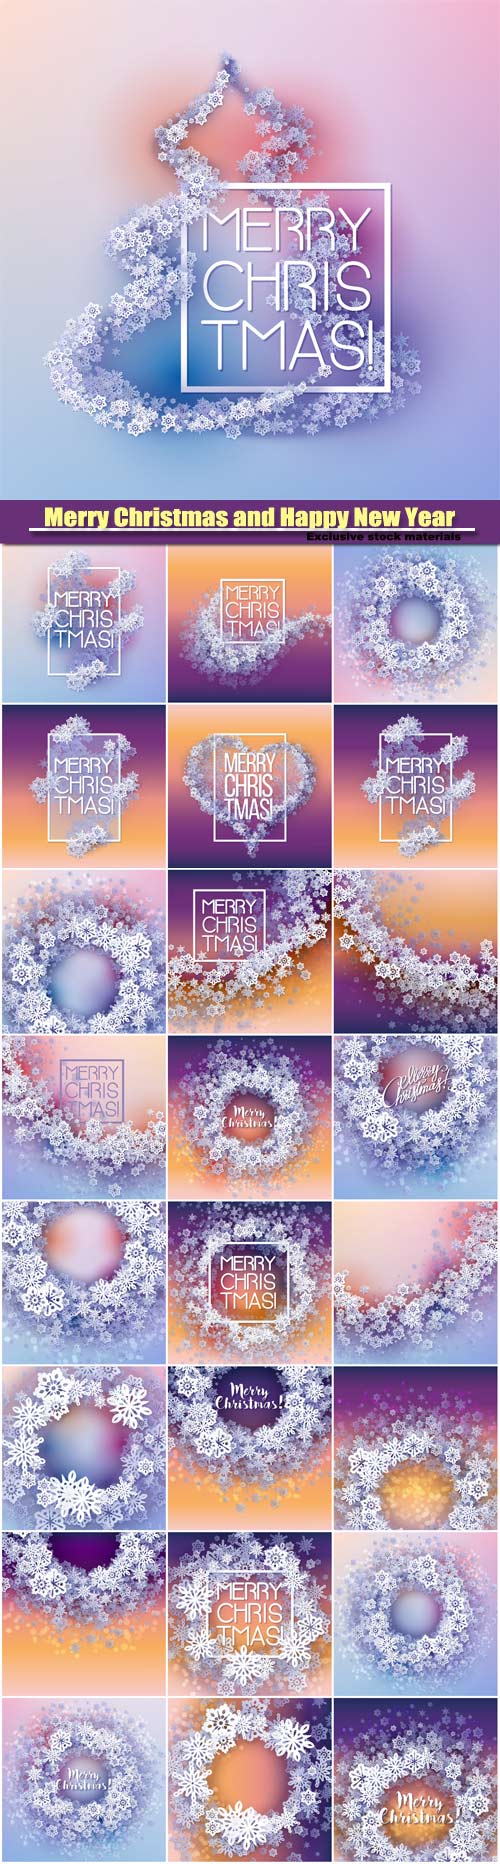 Merry Christmas and Happy New Year vector, winter frame made of snowflakes